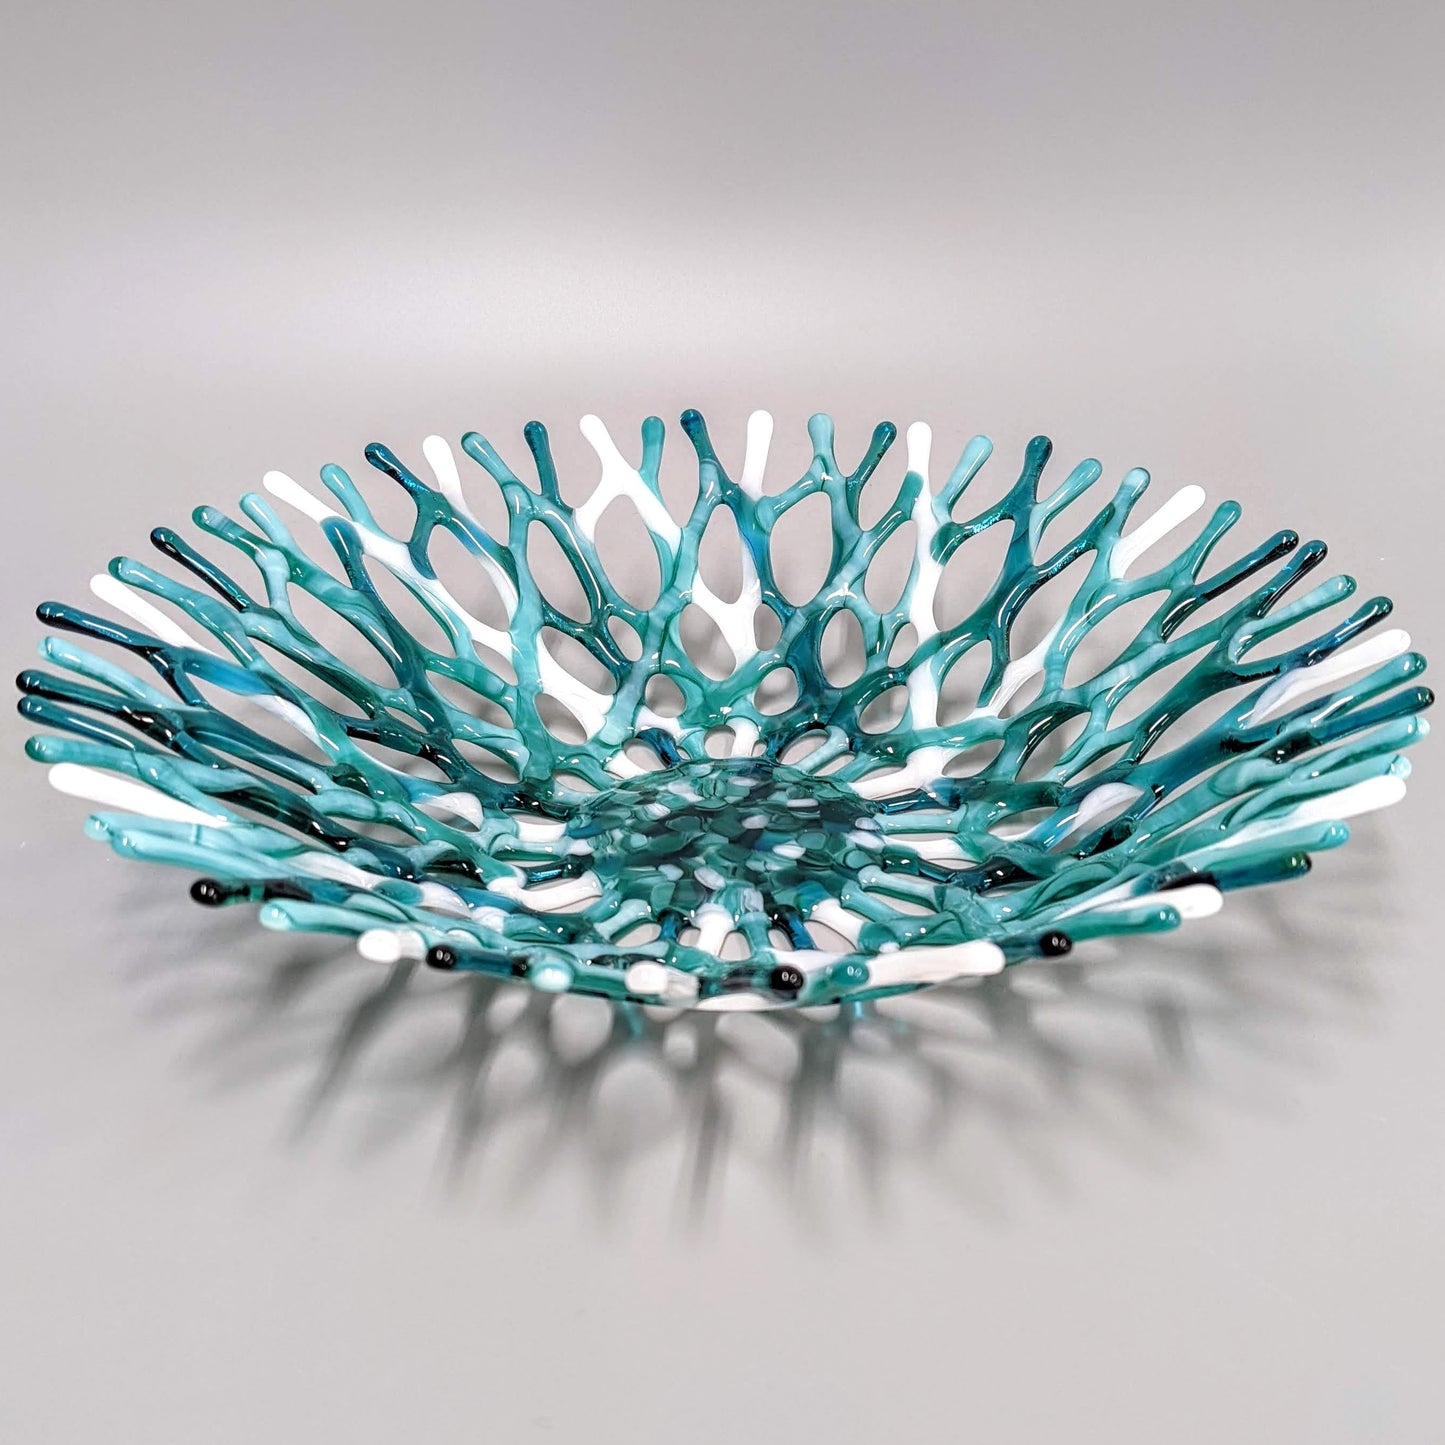 Glass Art Coral Bowl in Aqua Teal and White